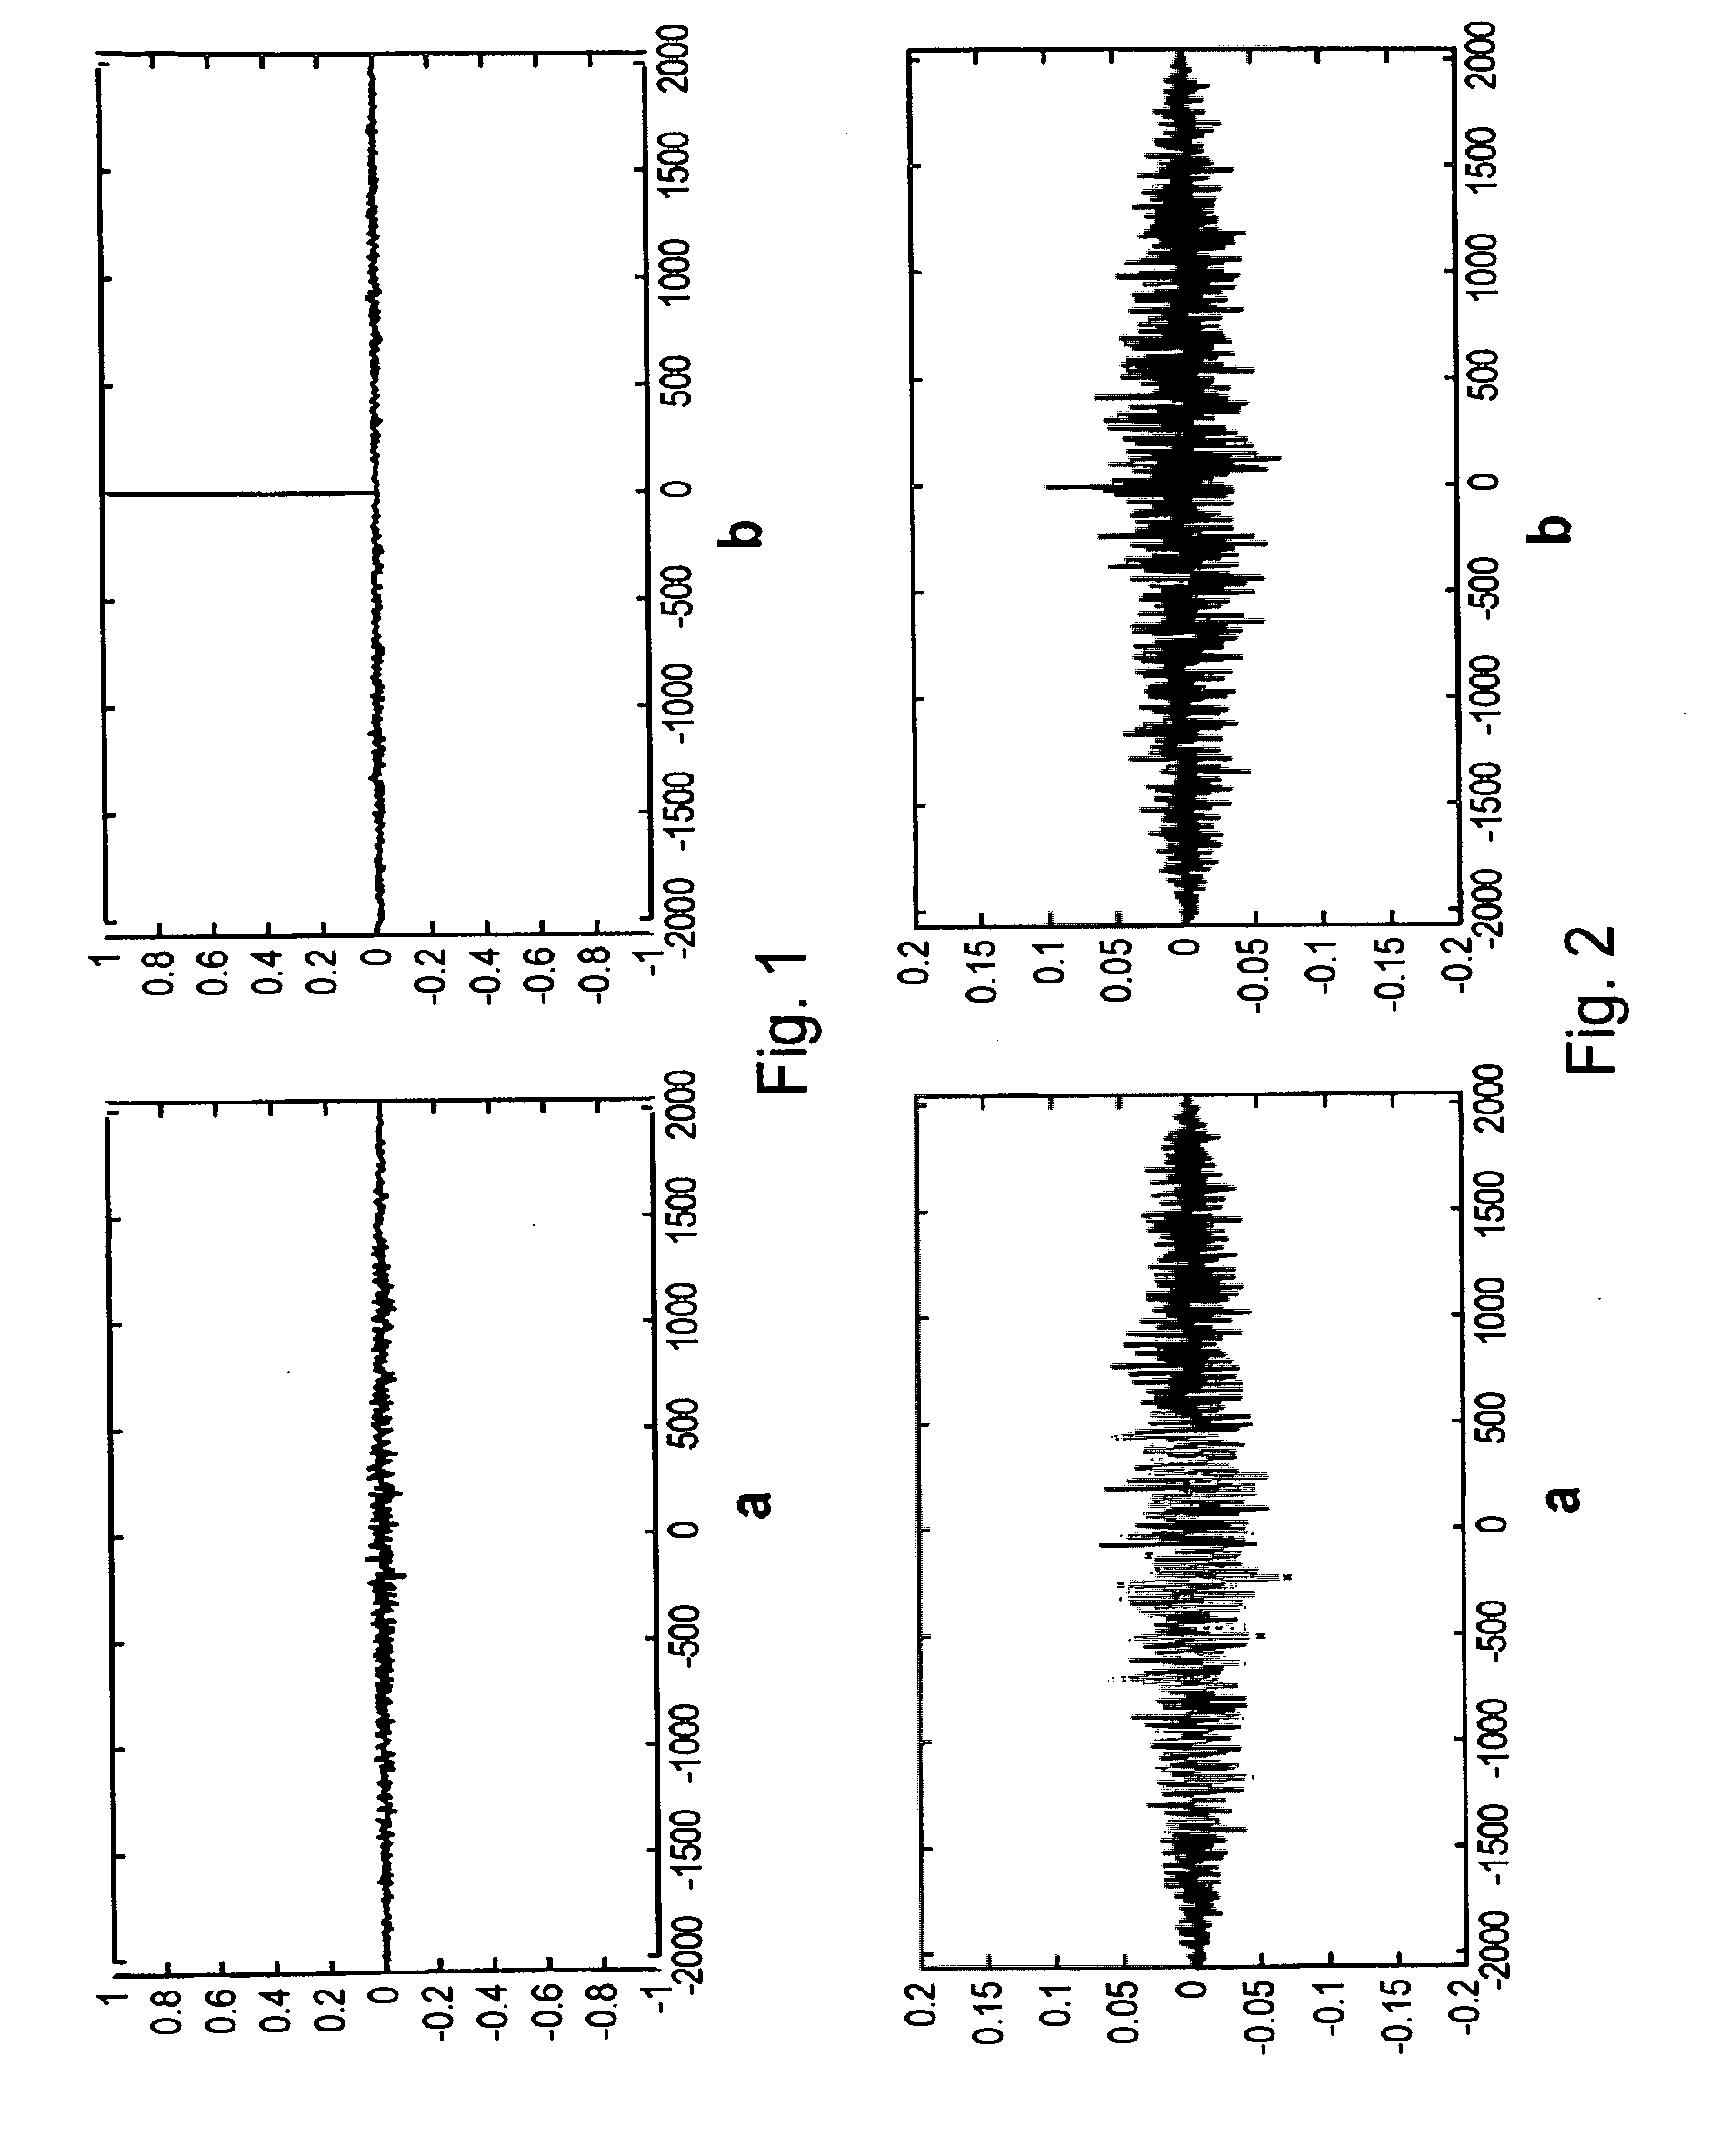 Method and apparatus for regaining watermark data that were embedded in an original signal by modifying sections of said original signal in relation to at least two different